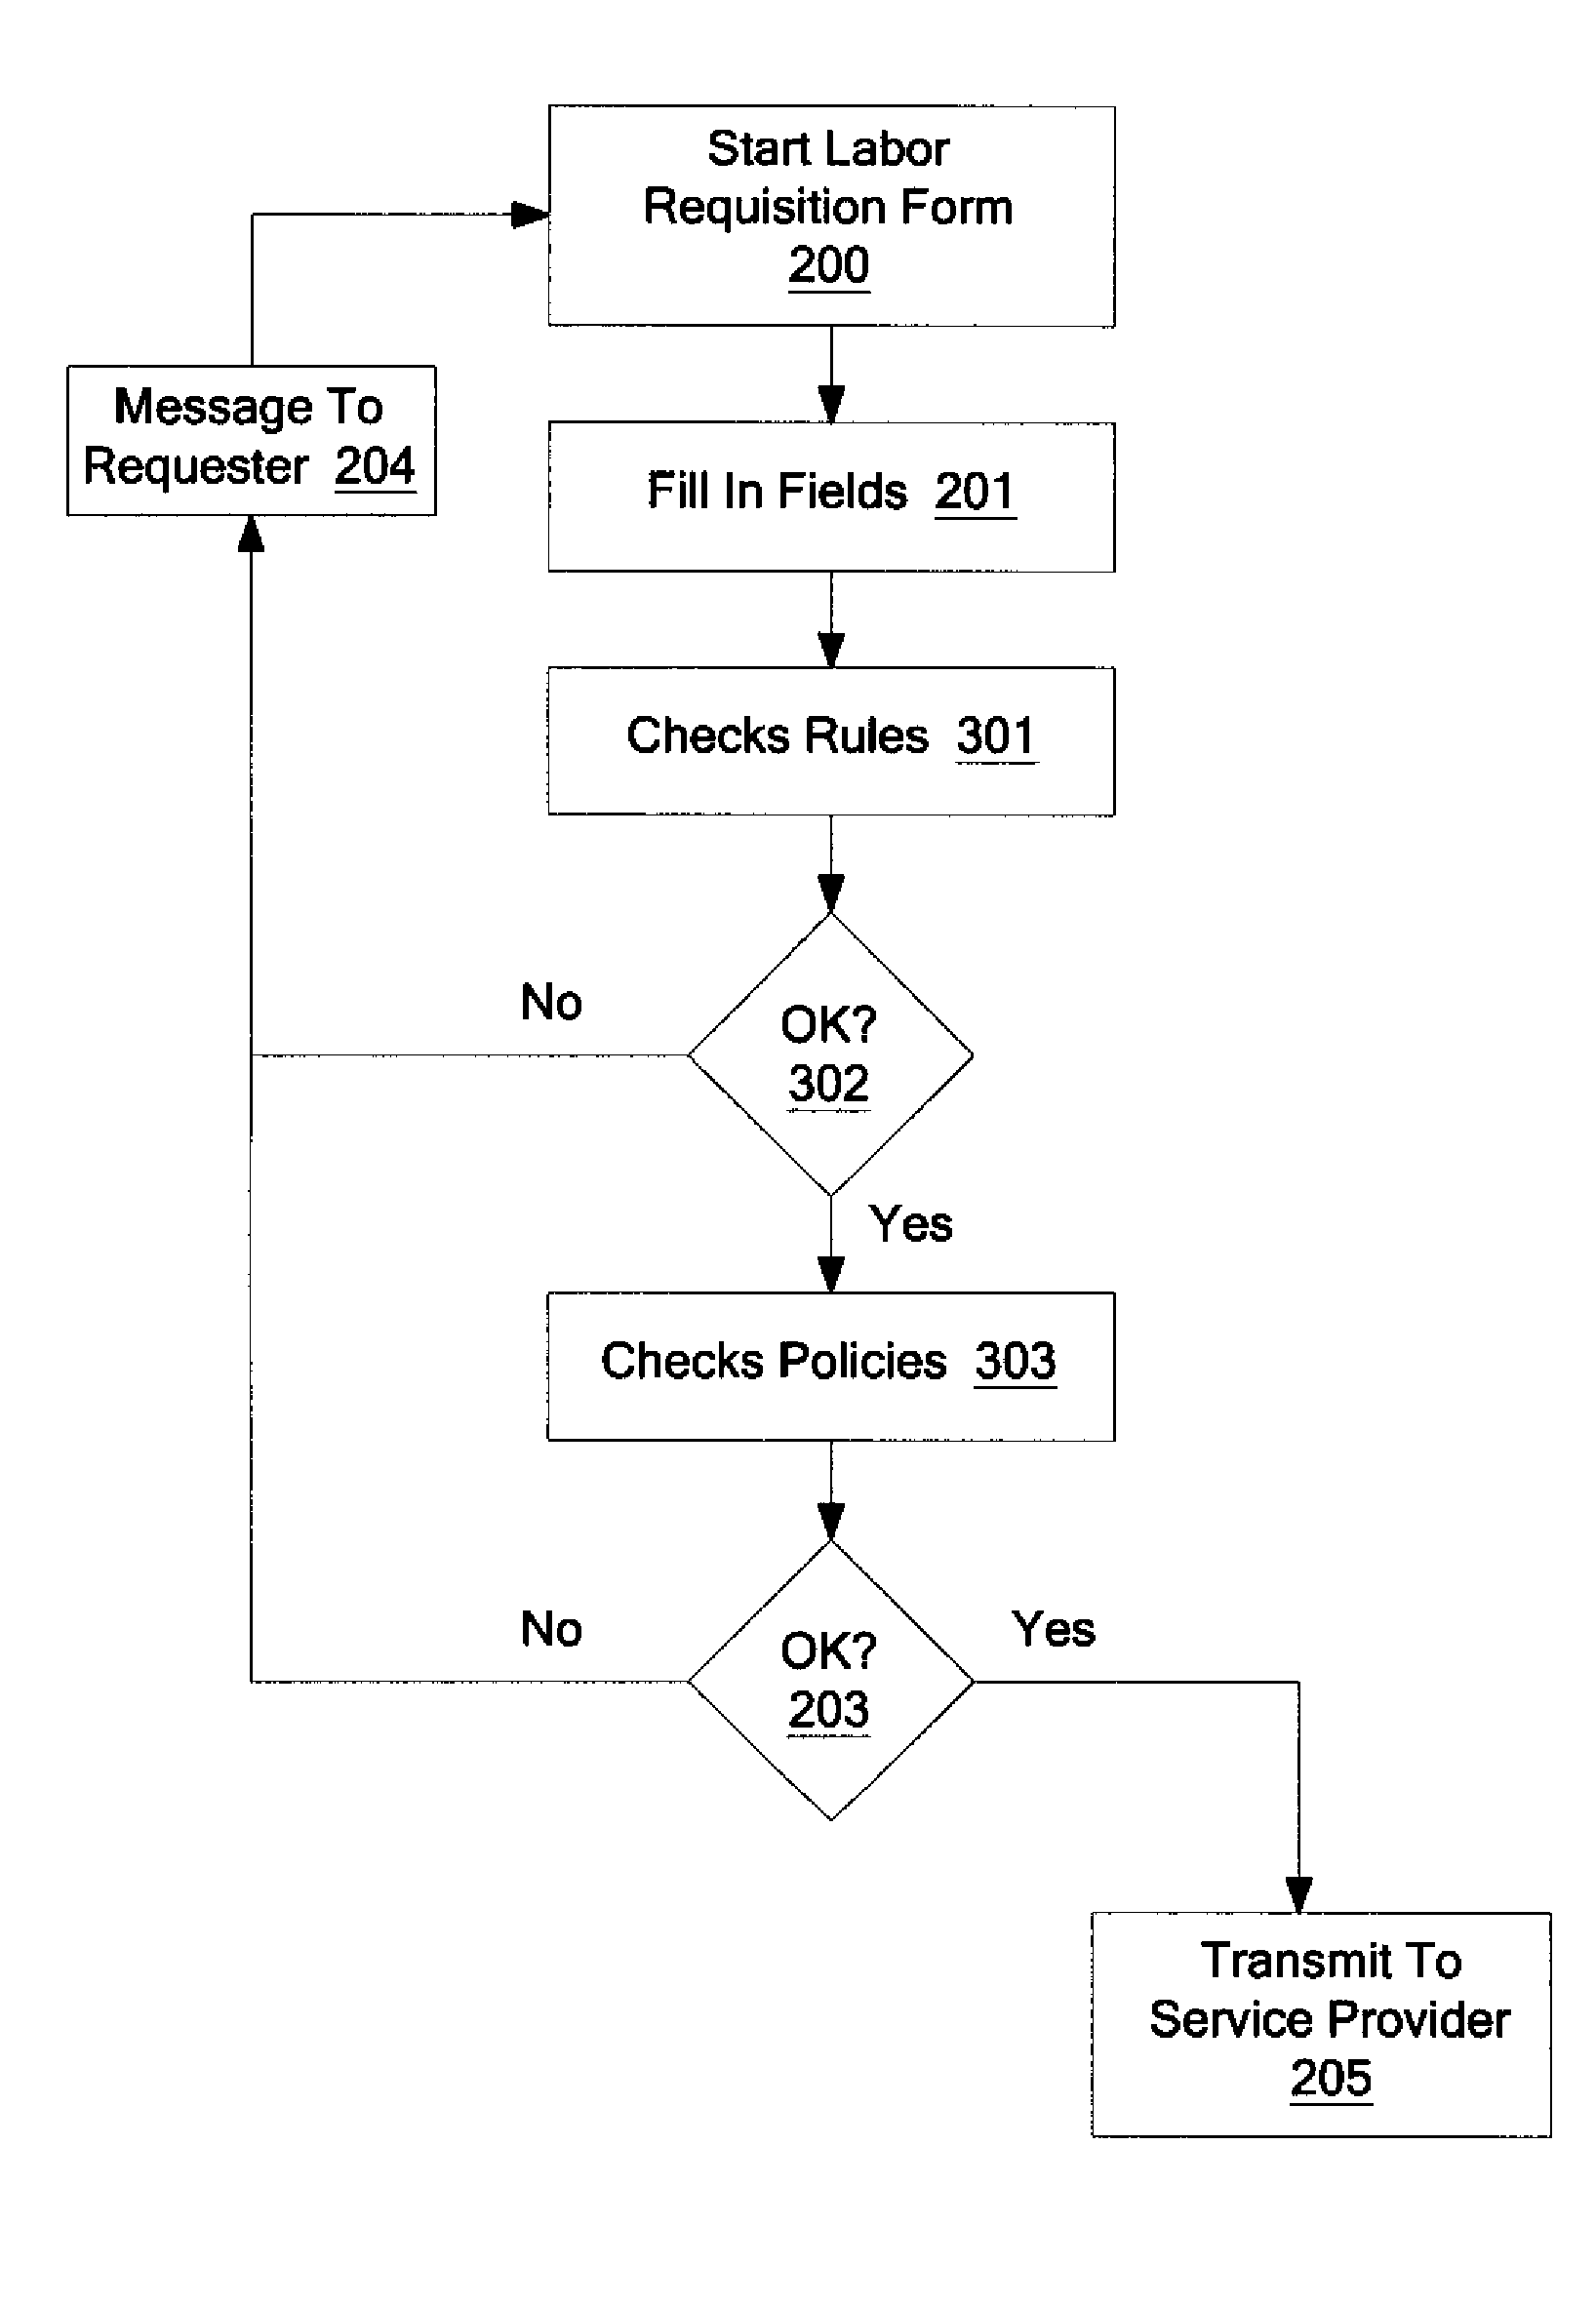 System and method for flexible handling of rules and regulations in labor hiring